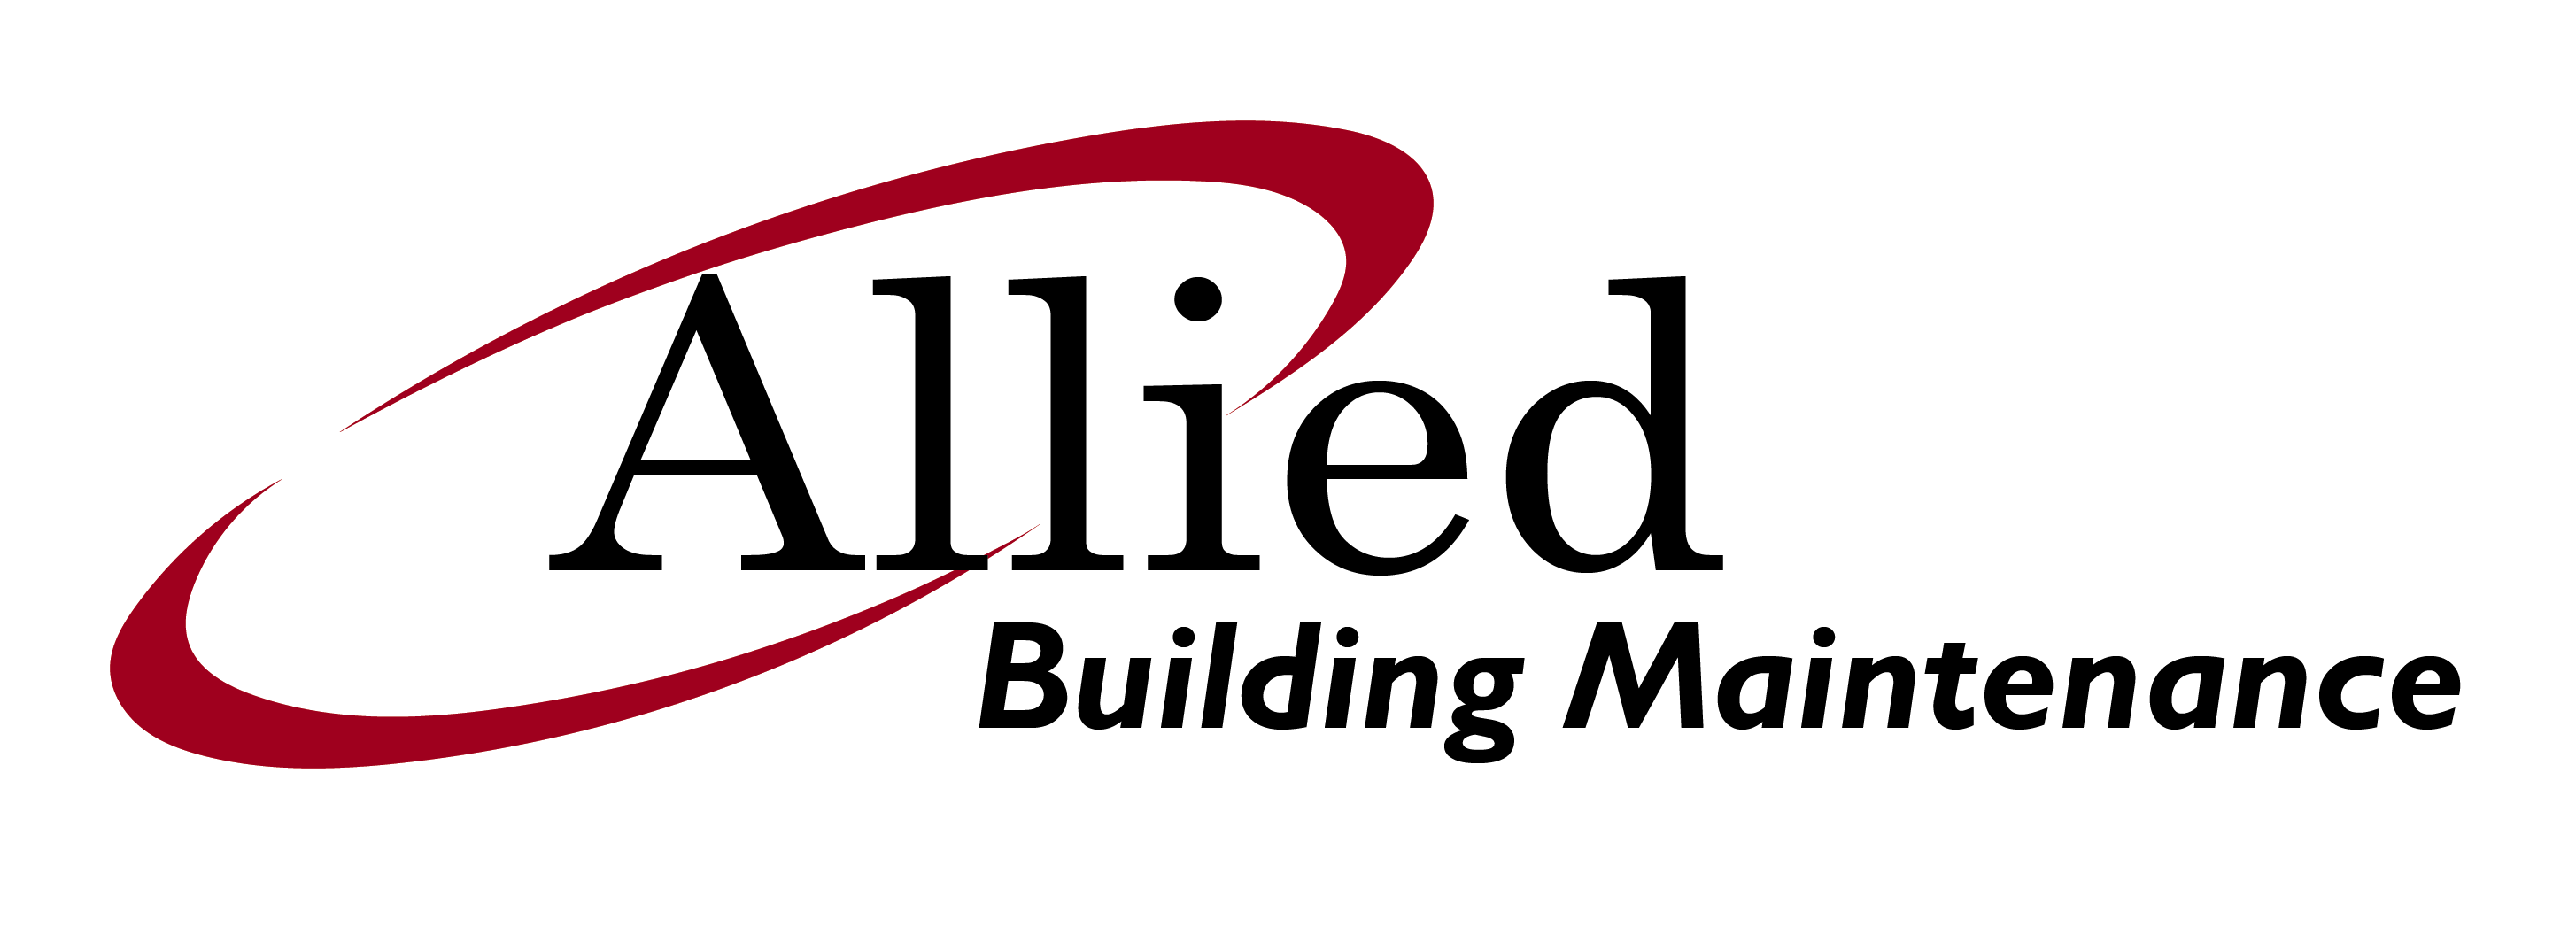 Products | Allied Building Maintenance